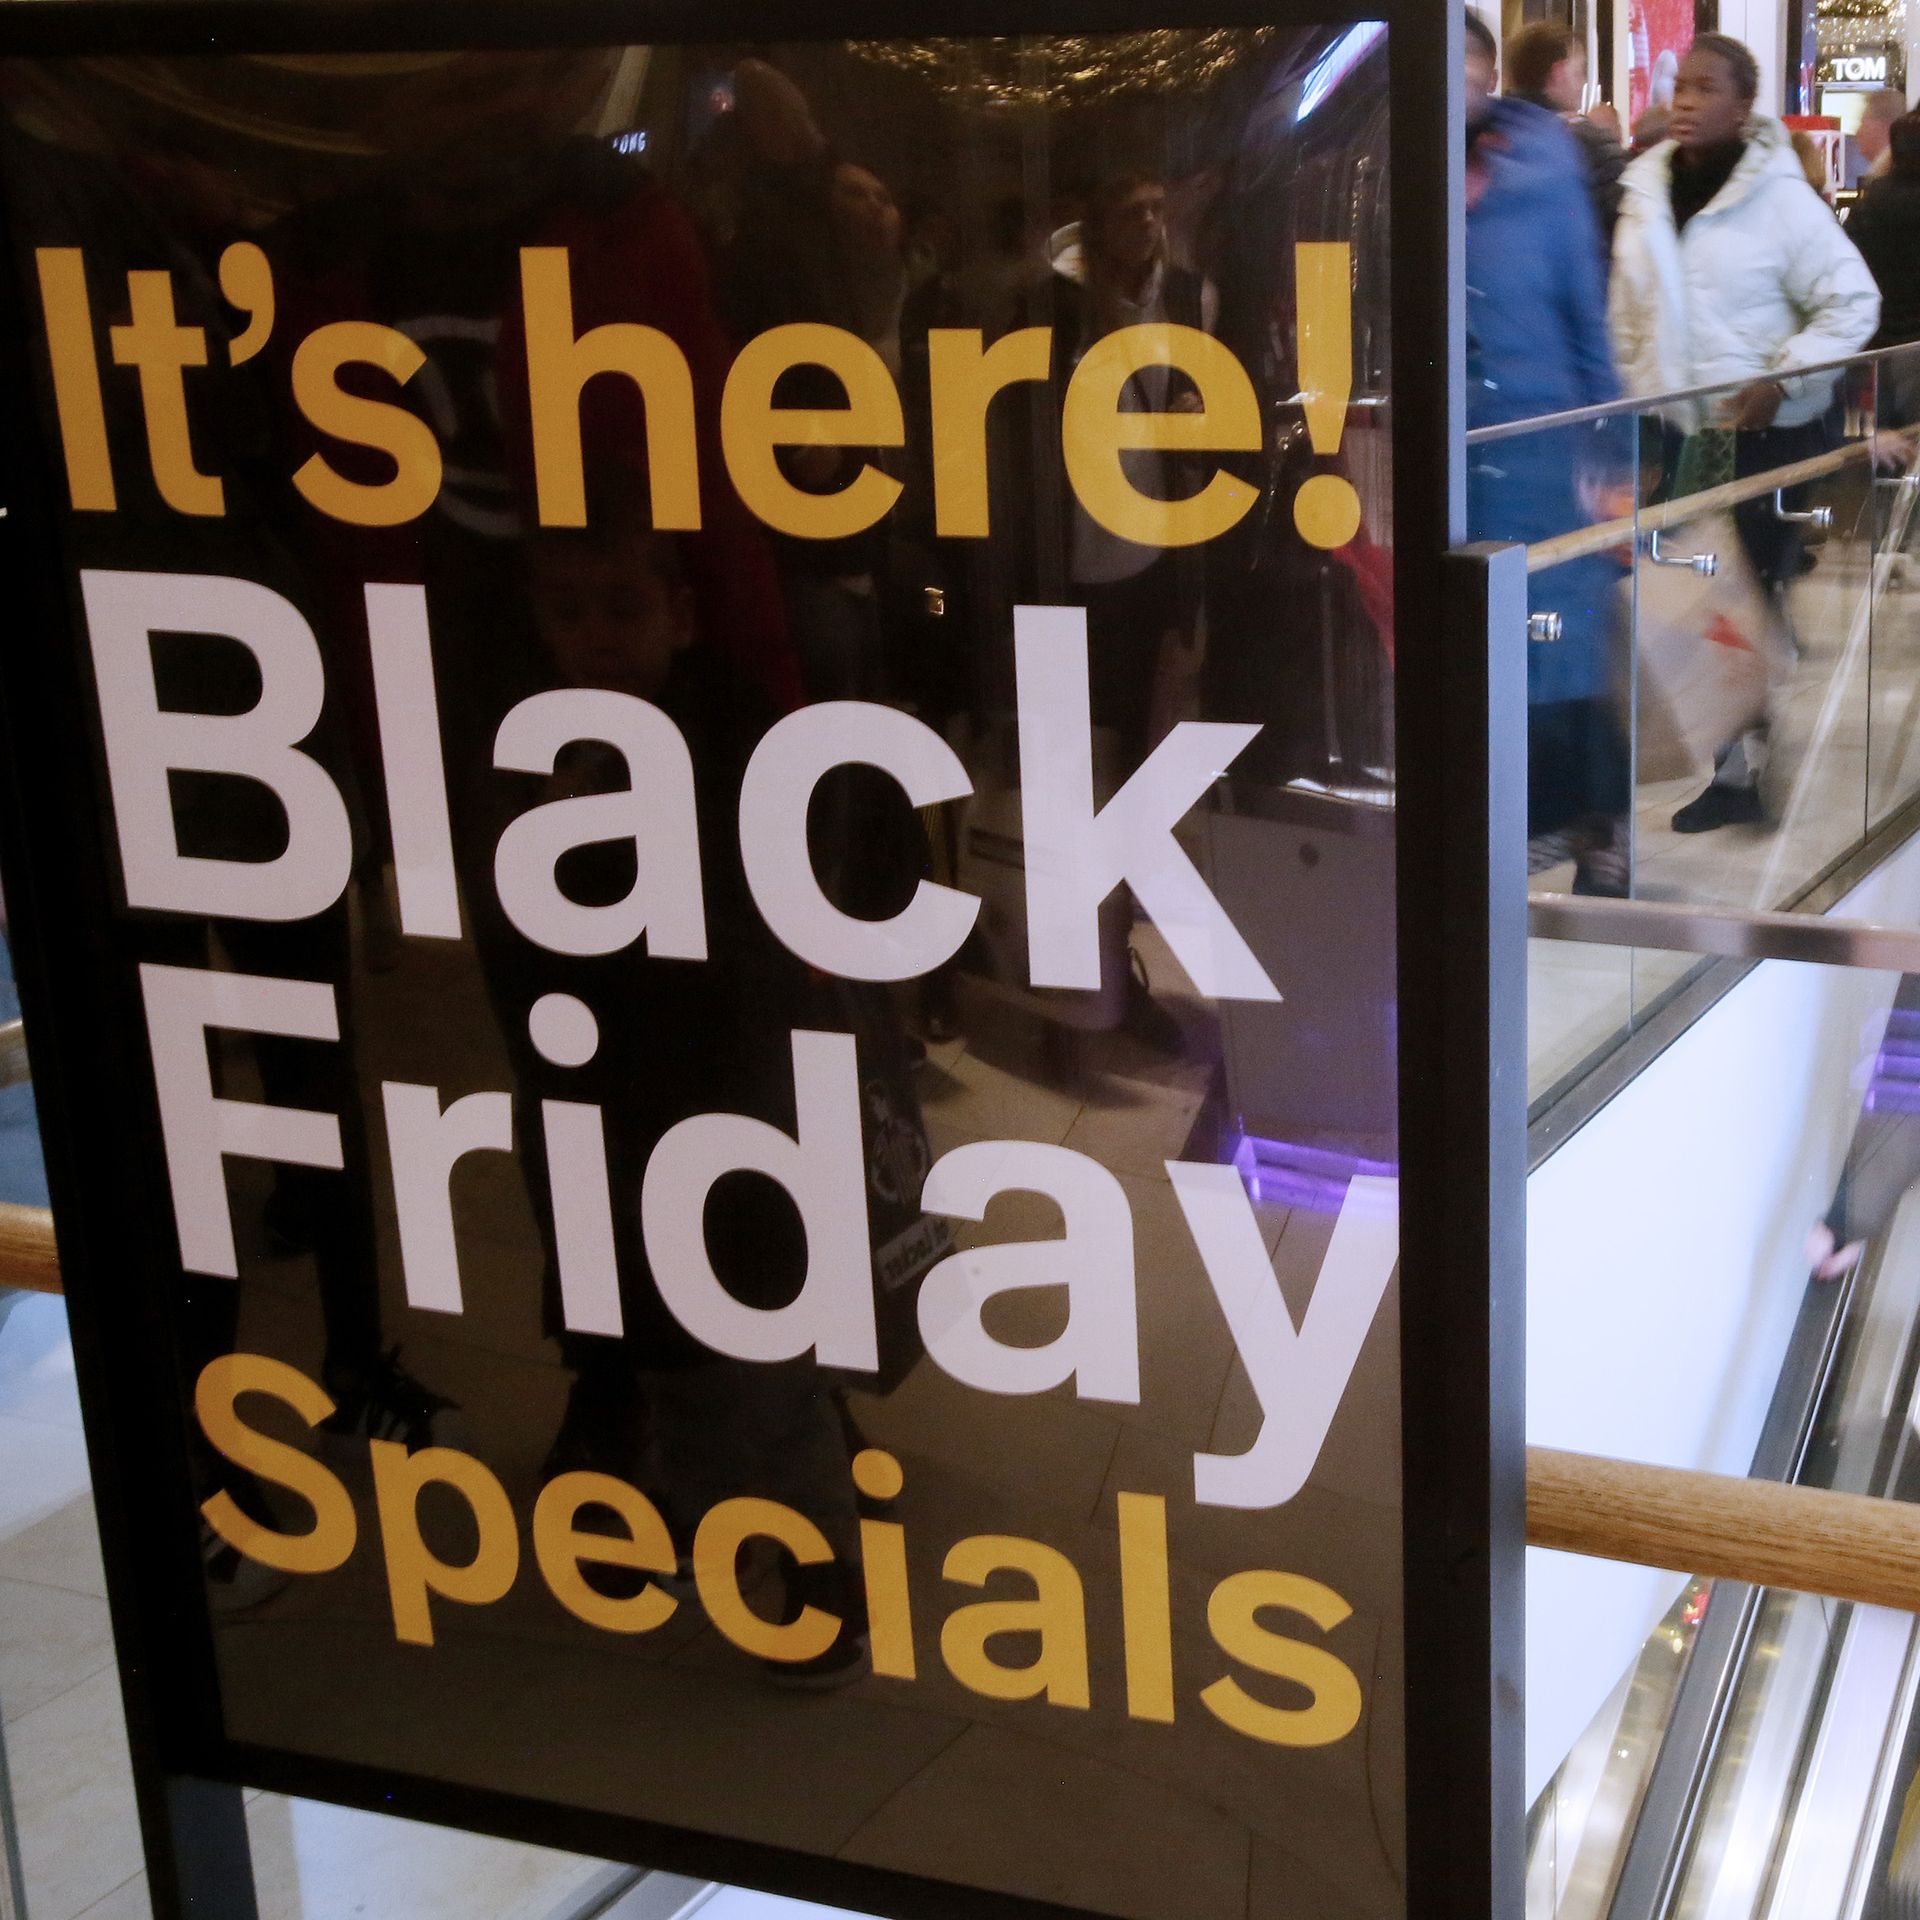 JC Penney Black Friday Ad Released with Early Access November 3rd